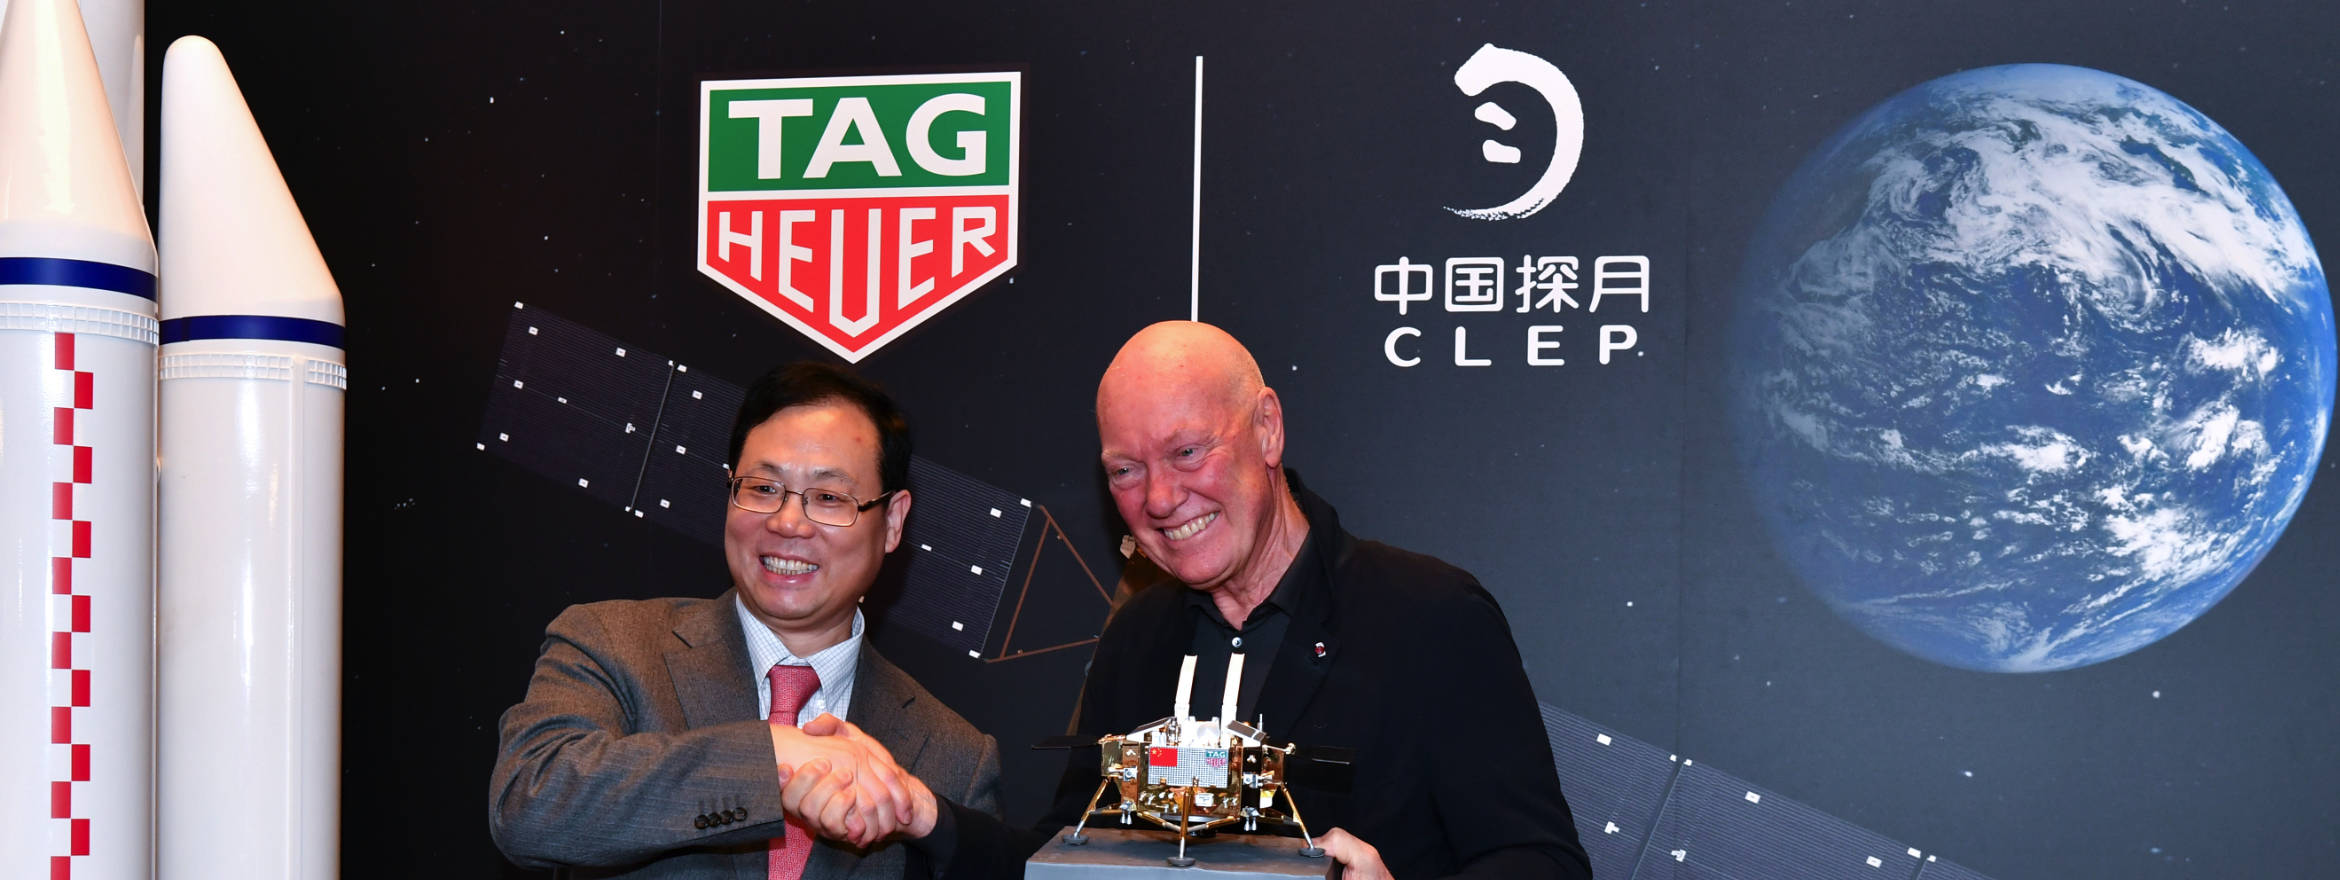 TAG Heuer & The Chinese Lunar Exploration Program